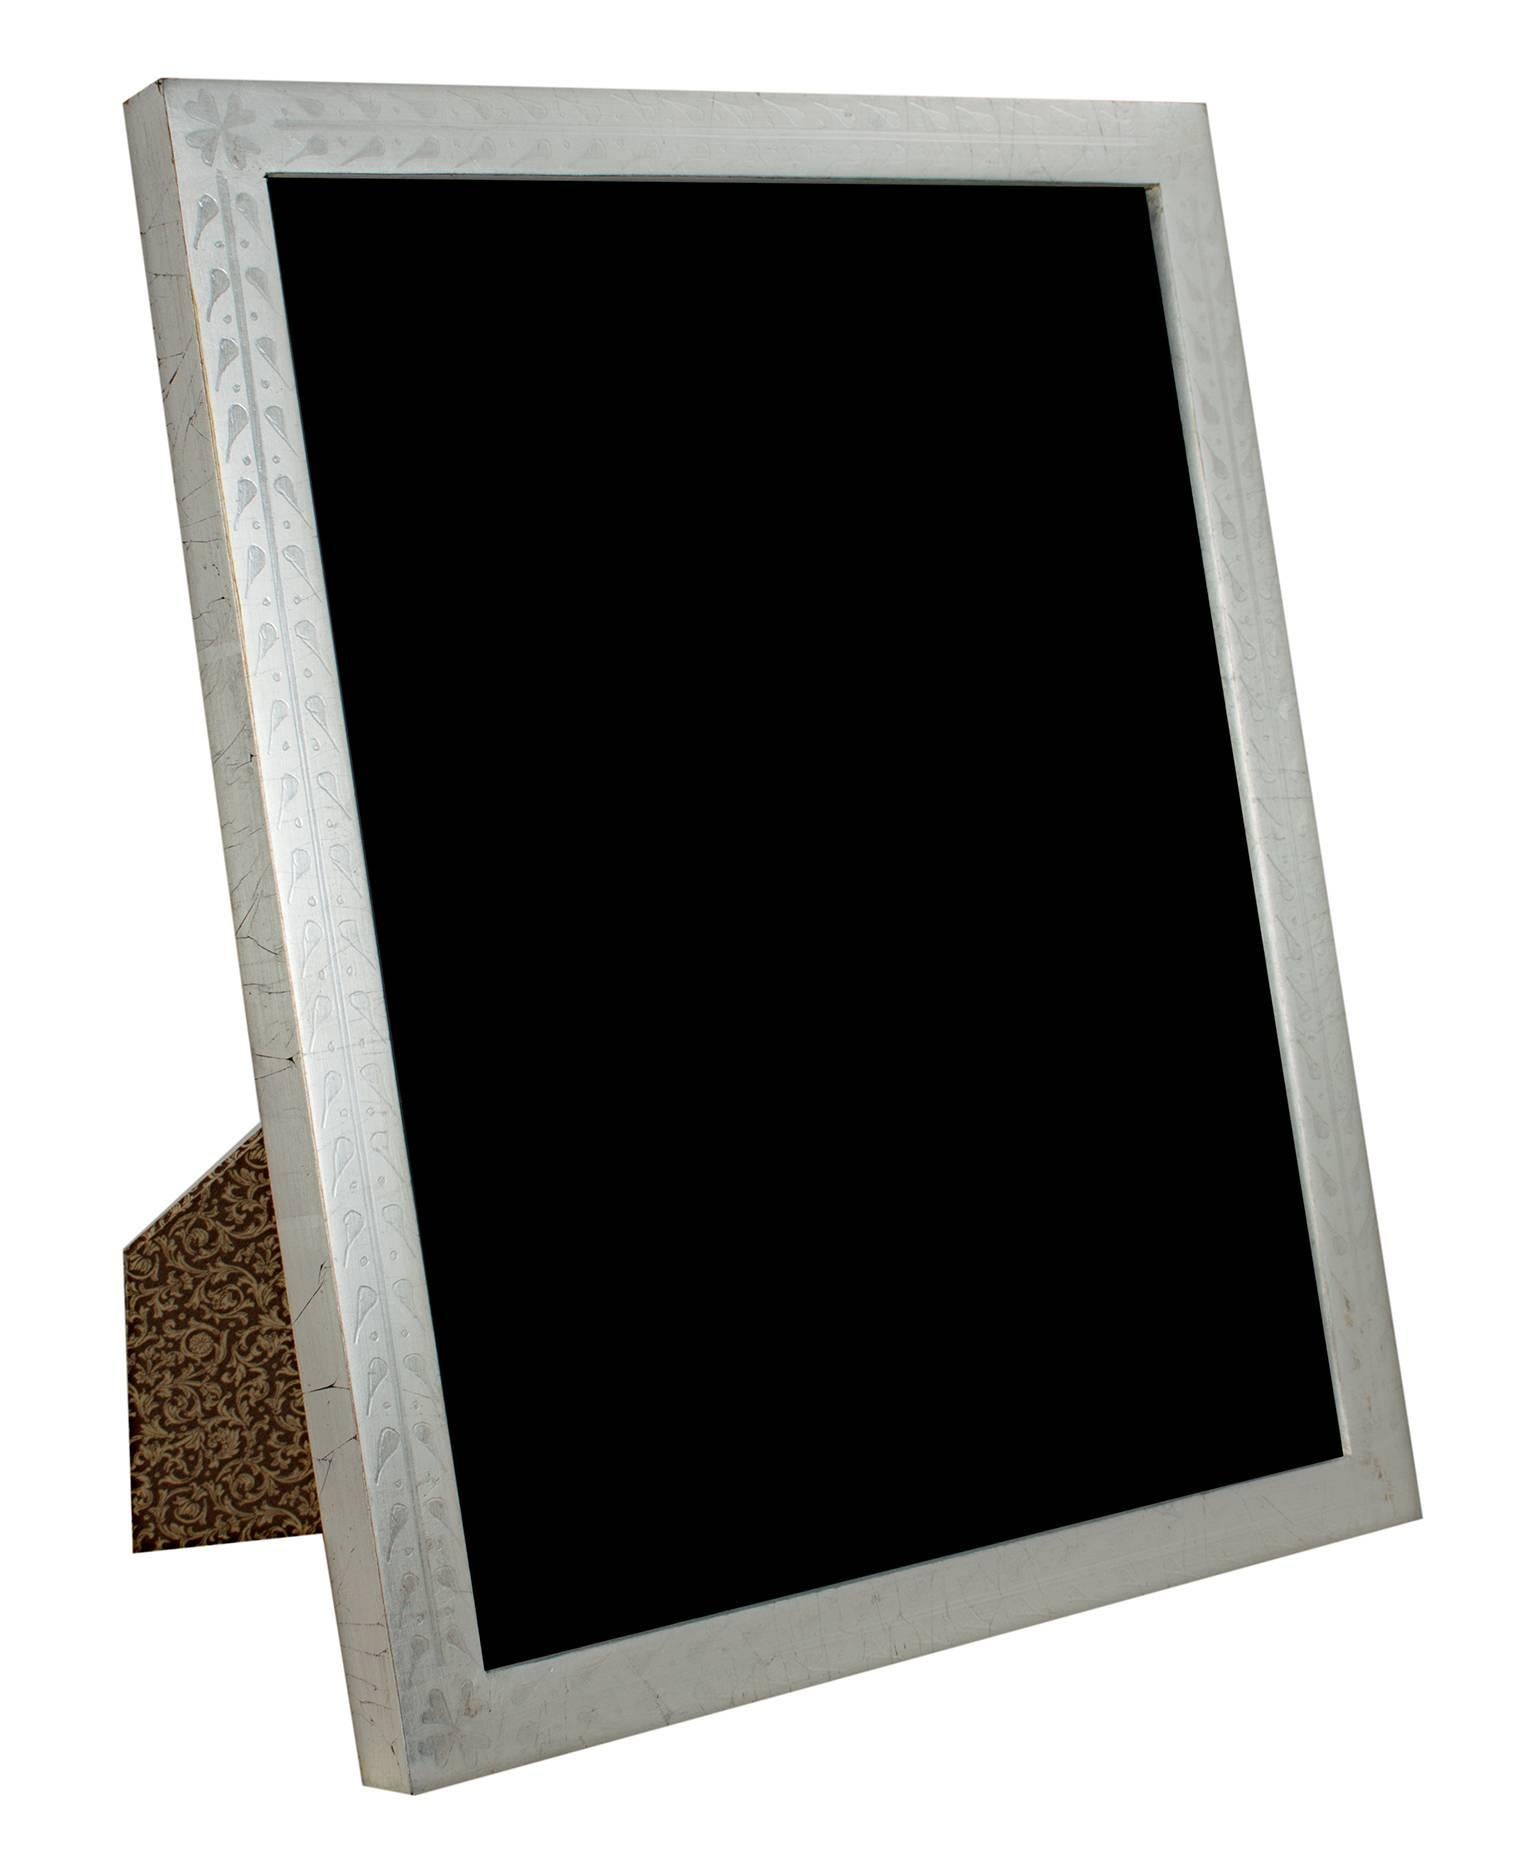 "Handmade 12K White Gold Leaf Photo Frame, " Wood 8 x 10 in from Romania